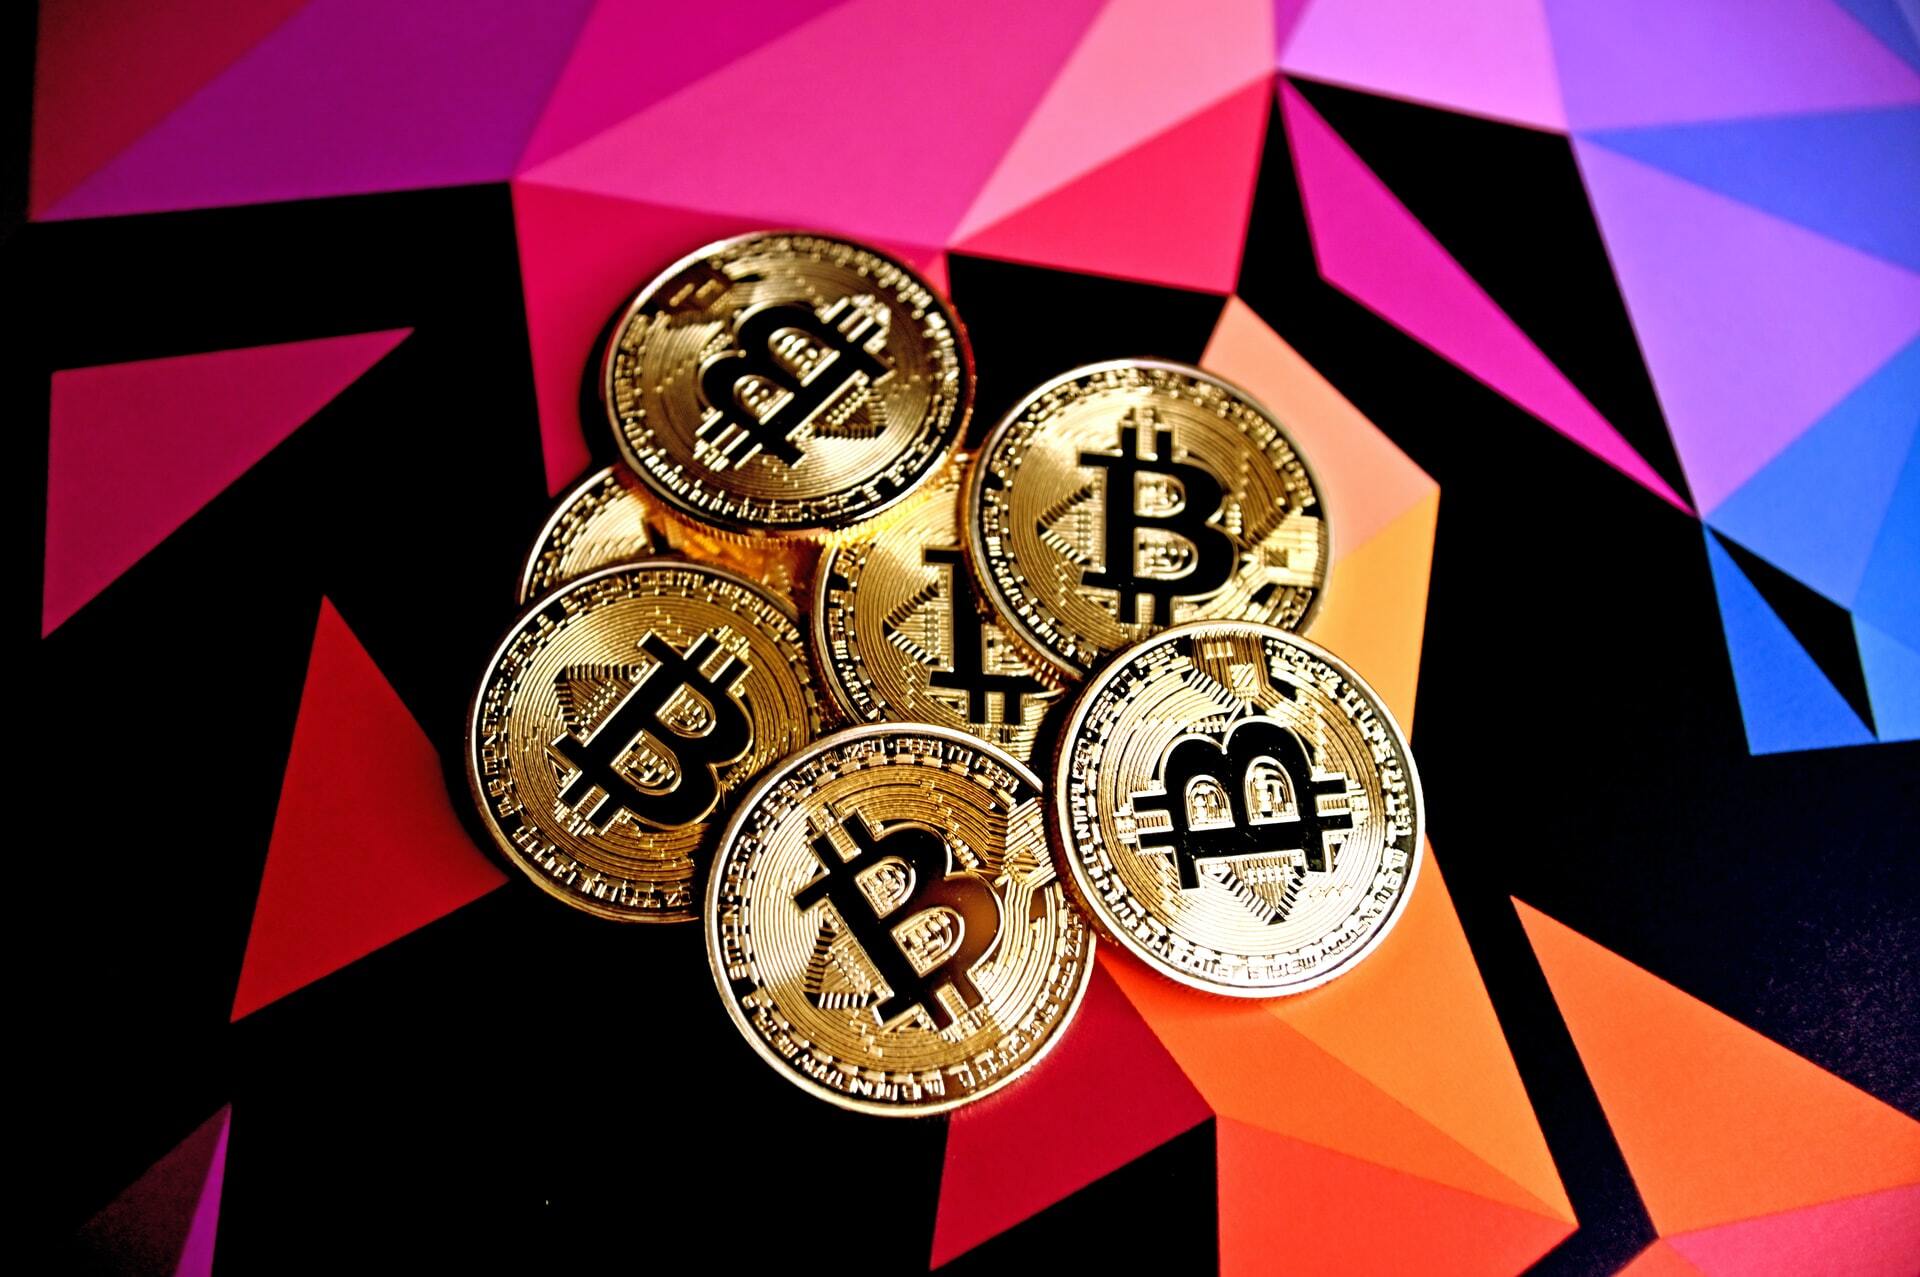 A pile of physical bitcoins placed on top of a colorful surface to illustrate the topic of what is cryptocurrency.